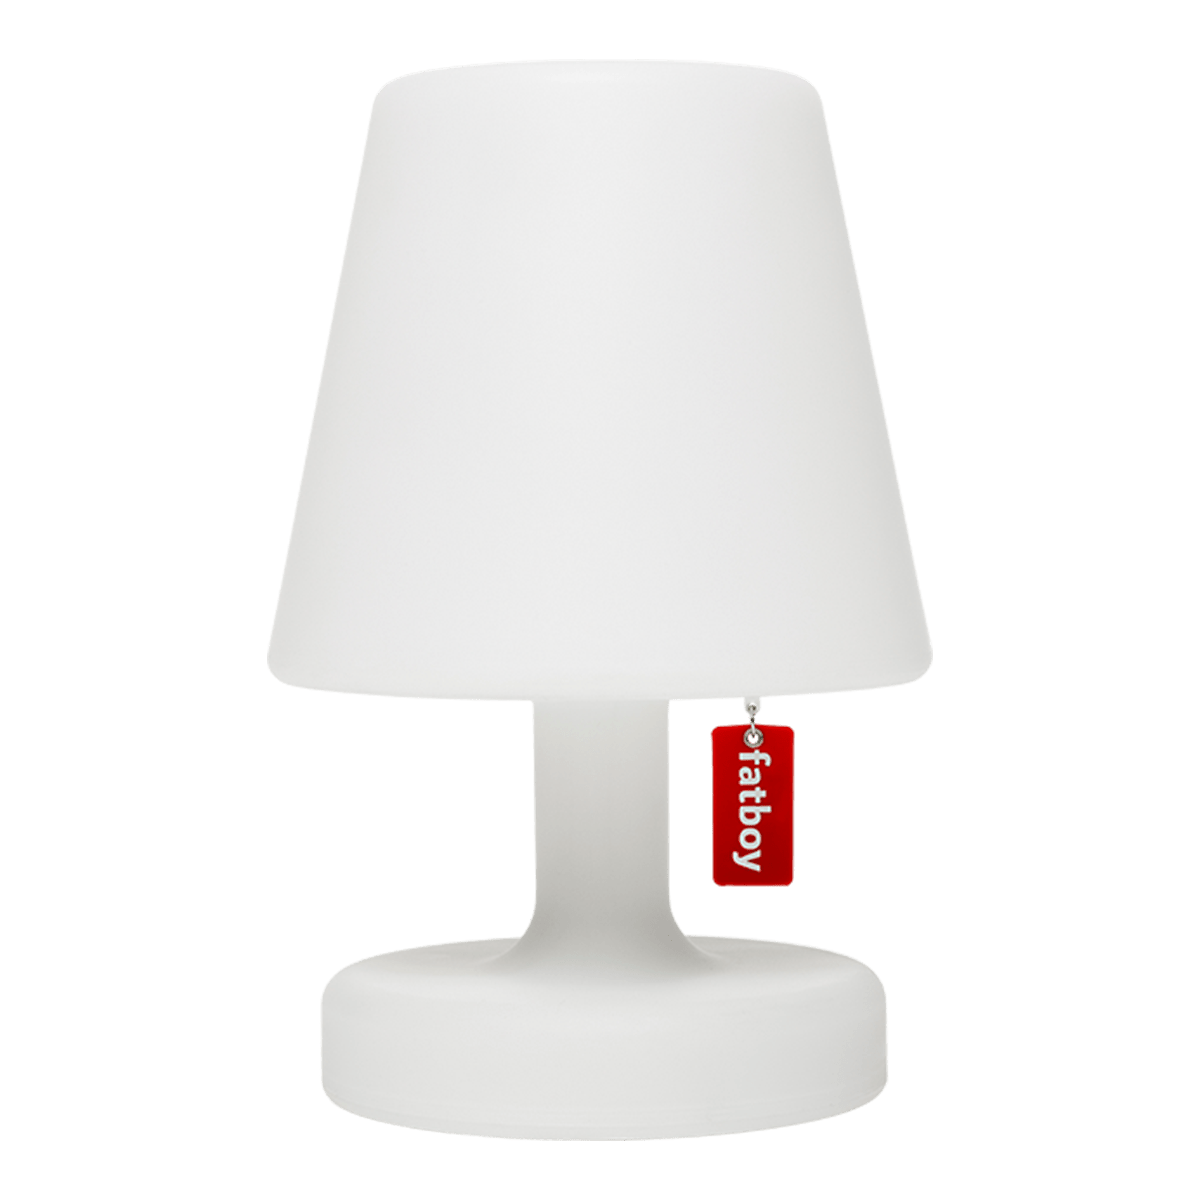 volume Inspectie tapijt Edison the Petit: white table lamp for indoor & outdoor use | Fatboy